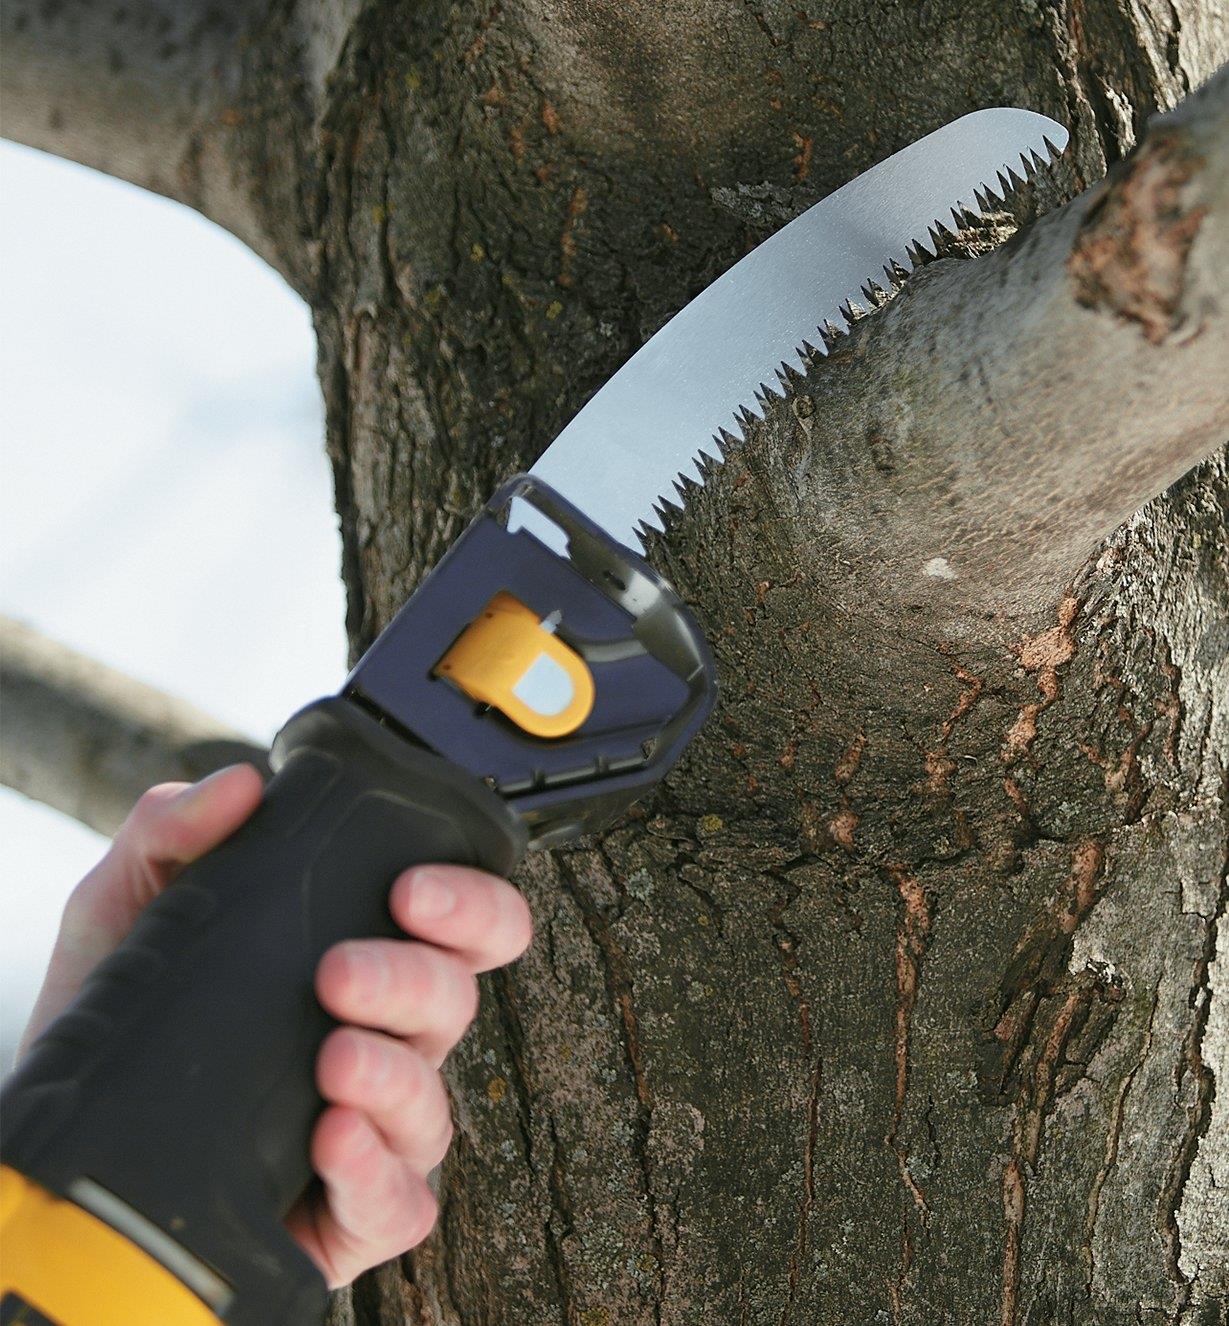 Pruning blade installed in a reciprocating saw being used to cut a tree branch